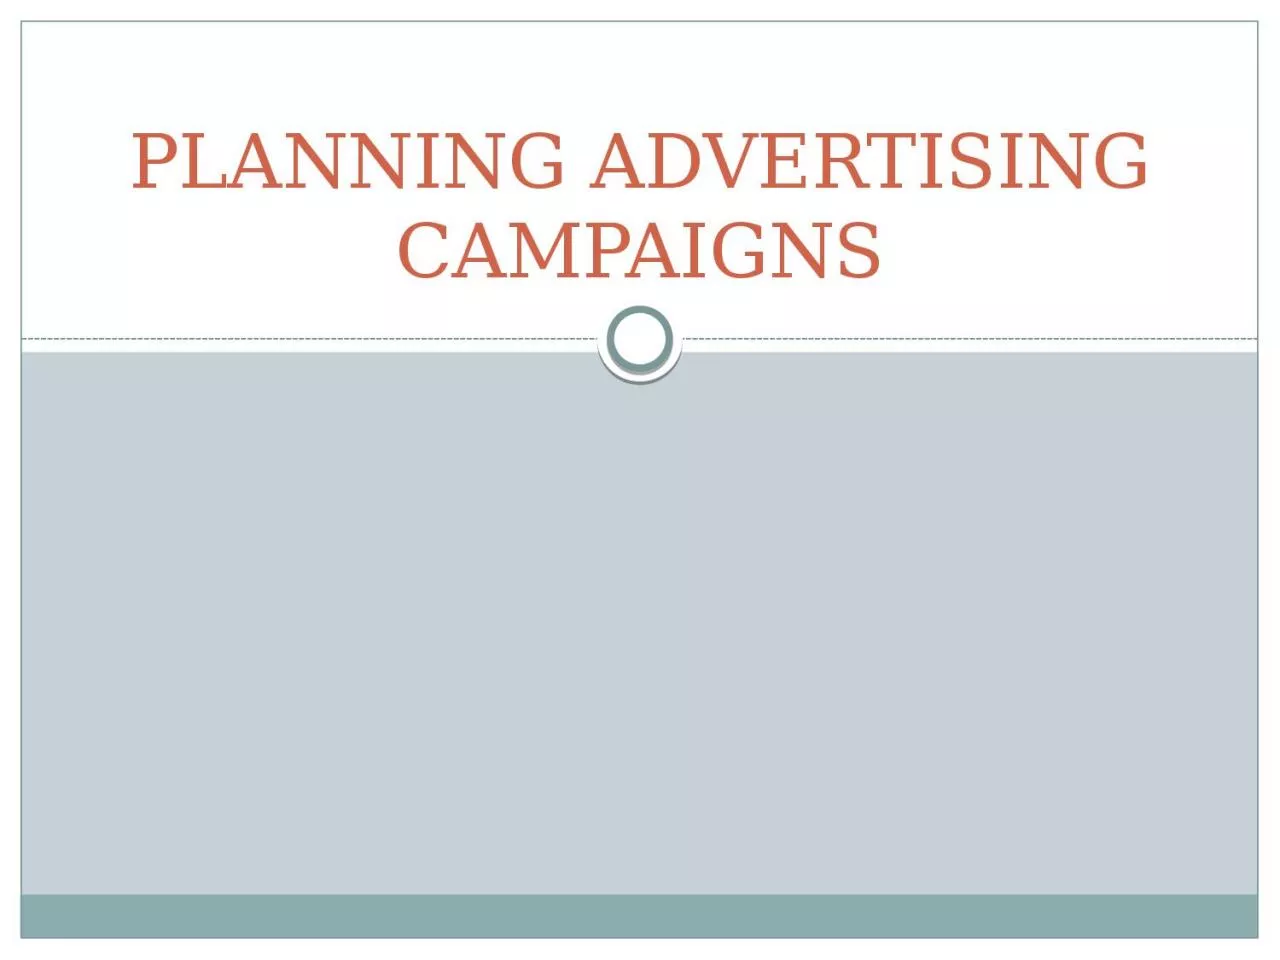 PLANNING ADVERTISING CAMPAIGNS